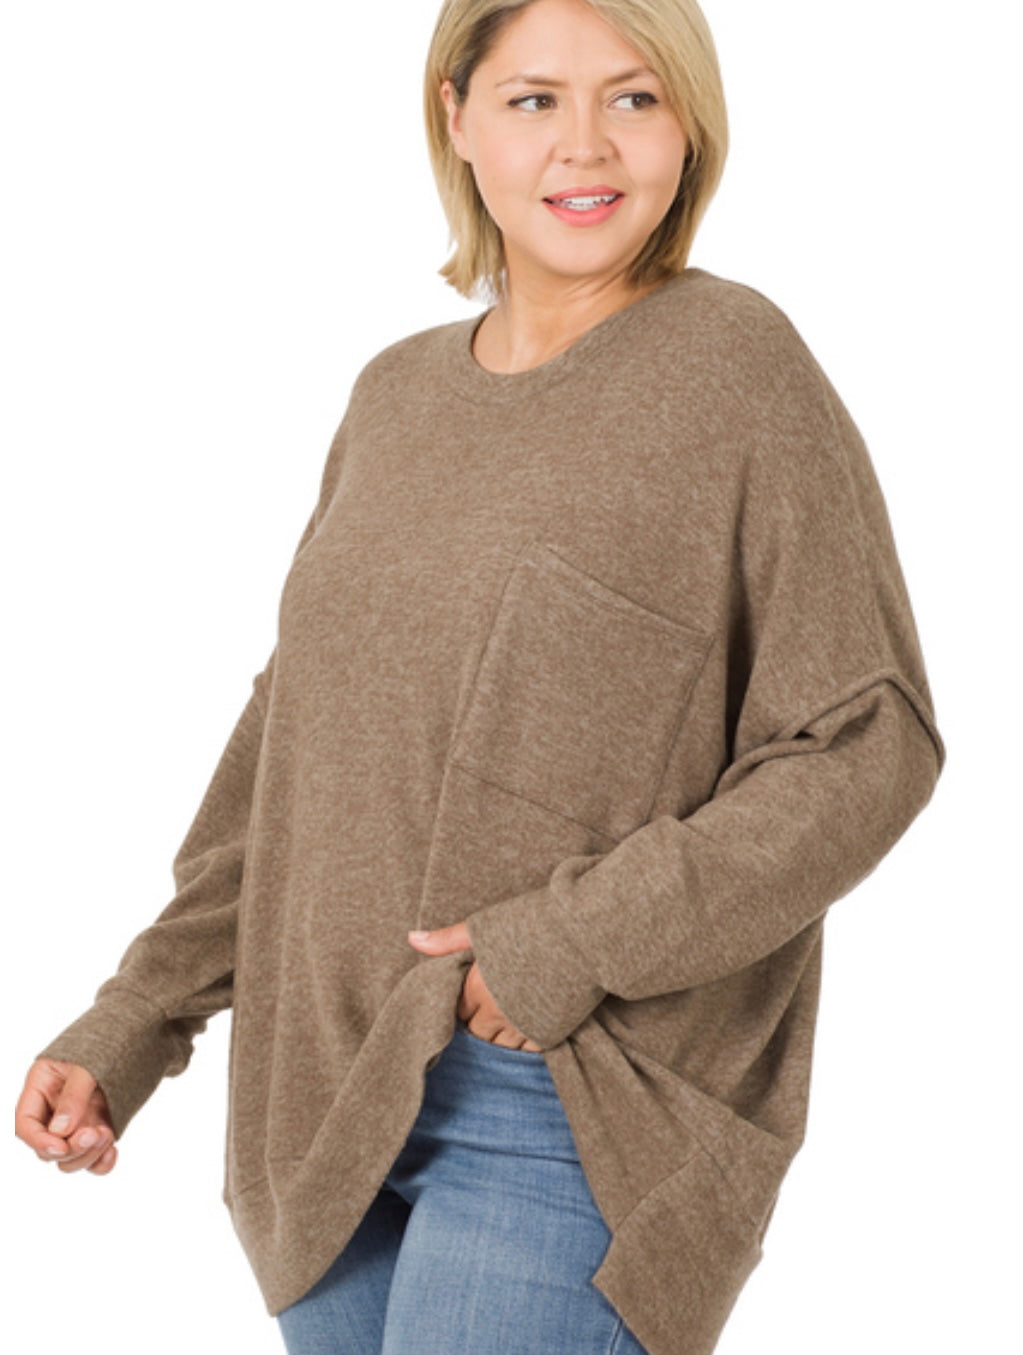 Plus Only - Brushed Melange Sweater (2 Colors)